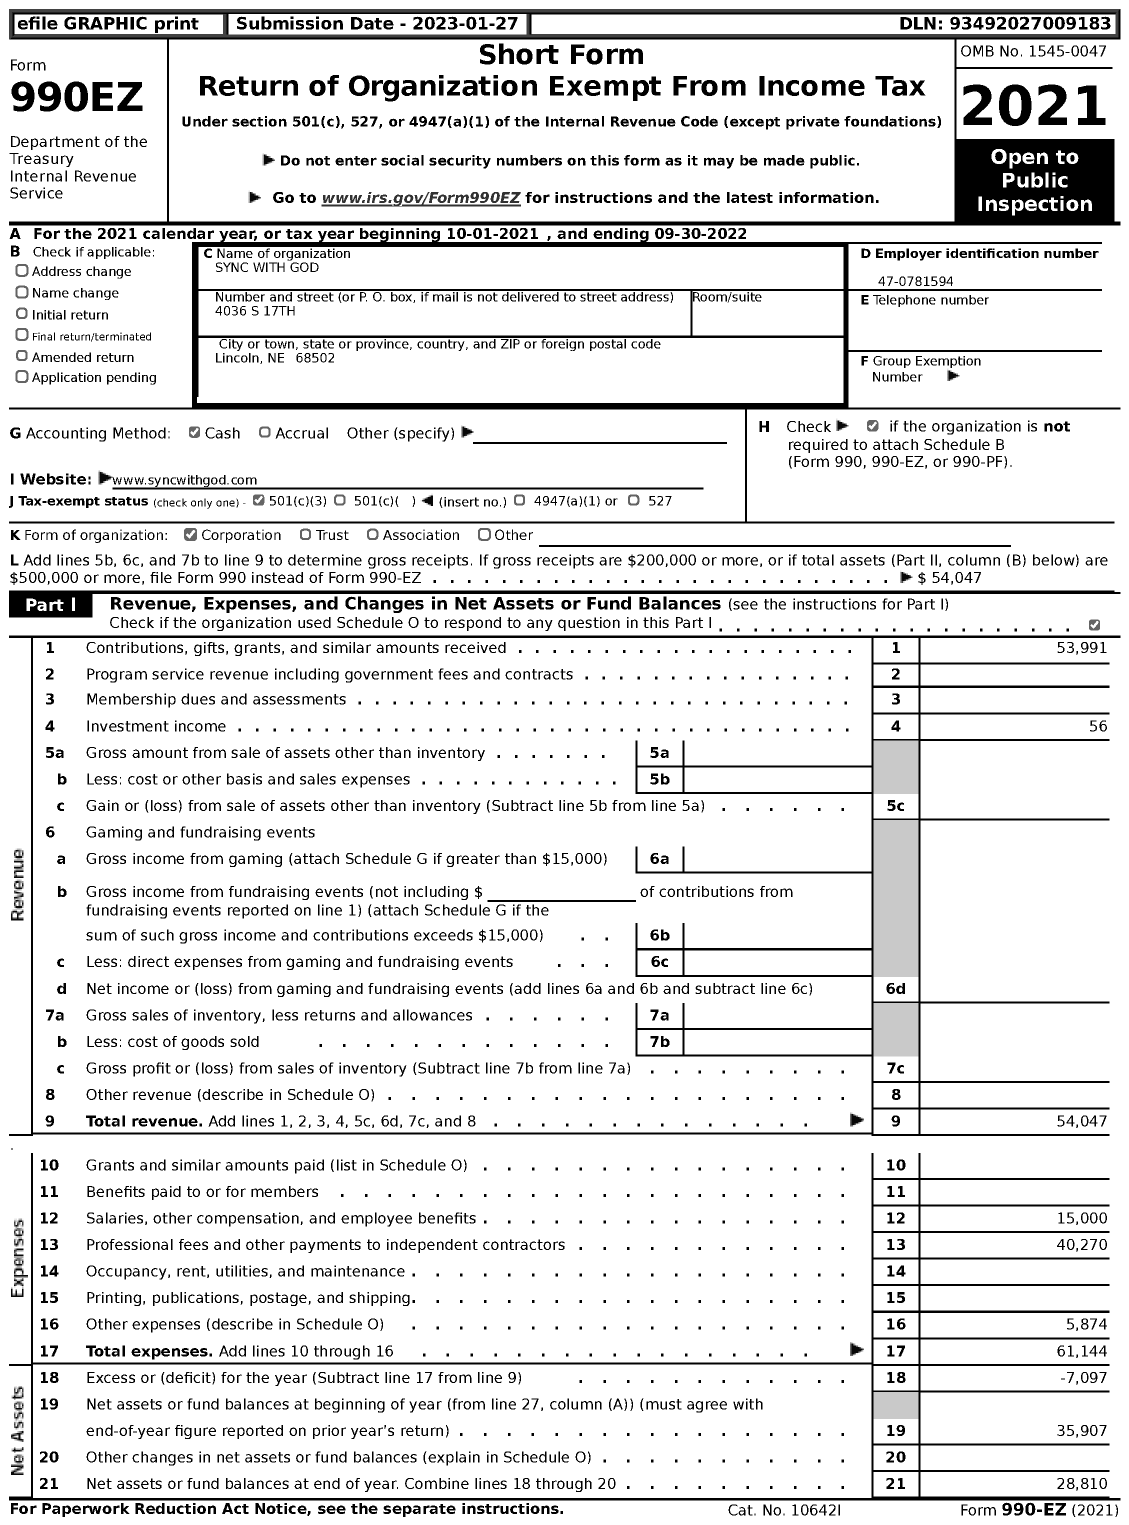 Image of first page of 2021 Form 990EZ for Sync with God